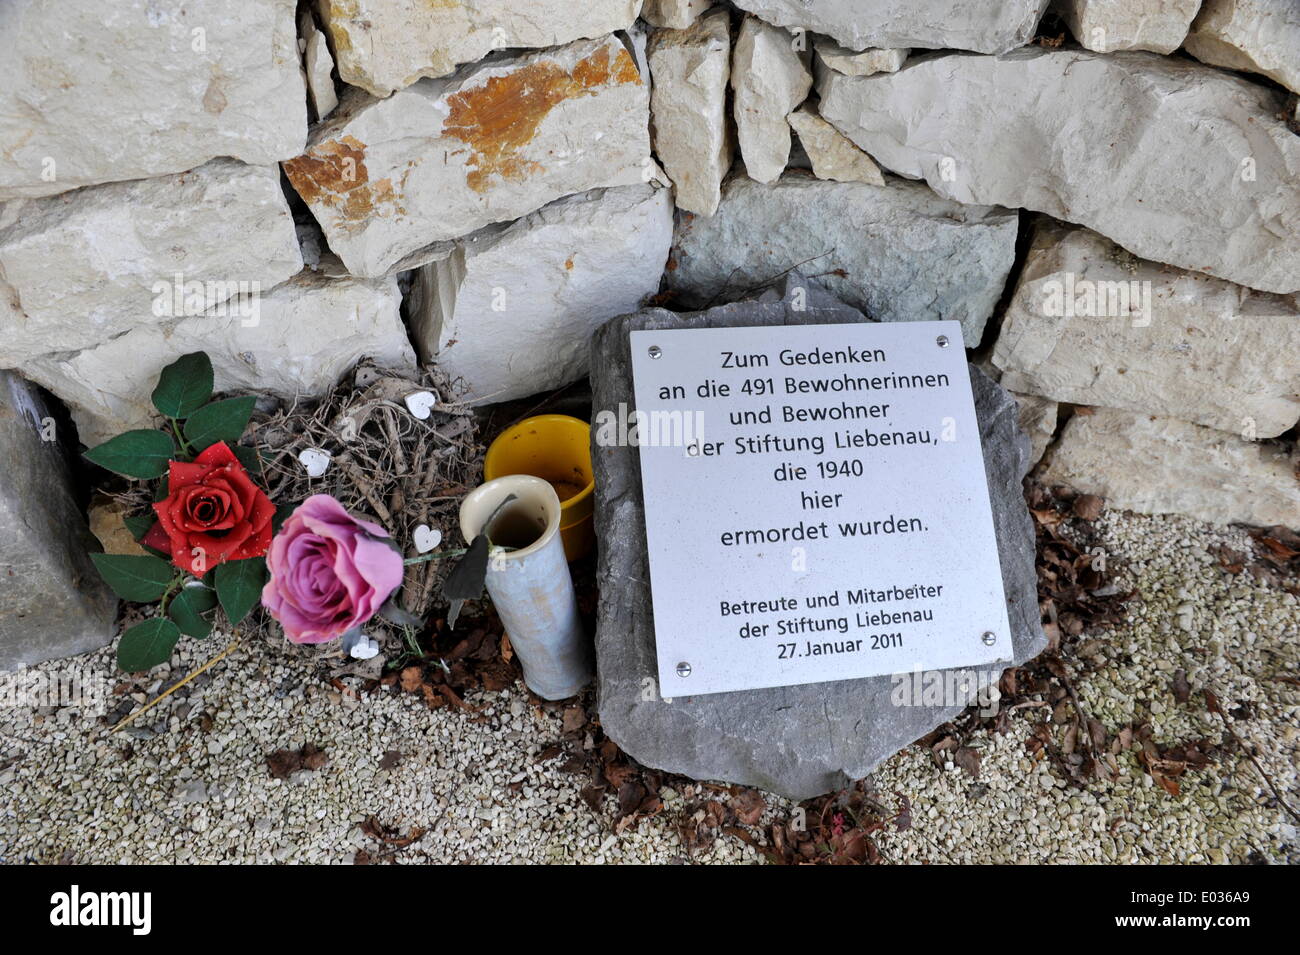 Memorial place in Grafeneck near german village of Gomadingen commemorates the victims of nazi-euthanize. 16.04.2014 Stock Photo